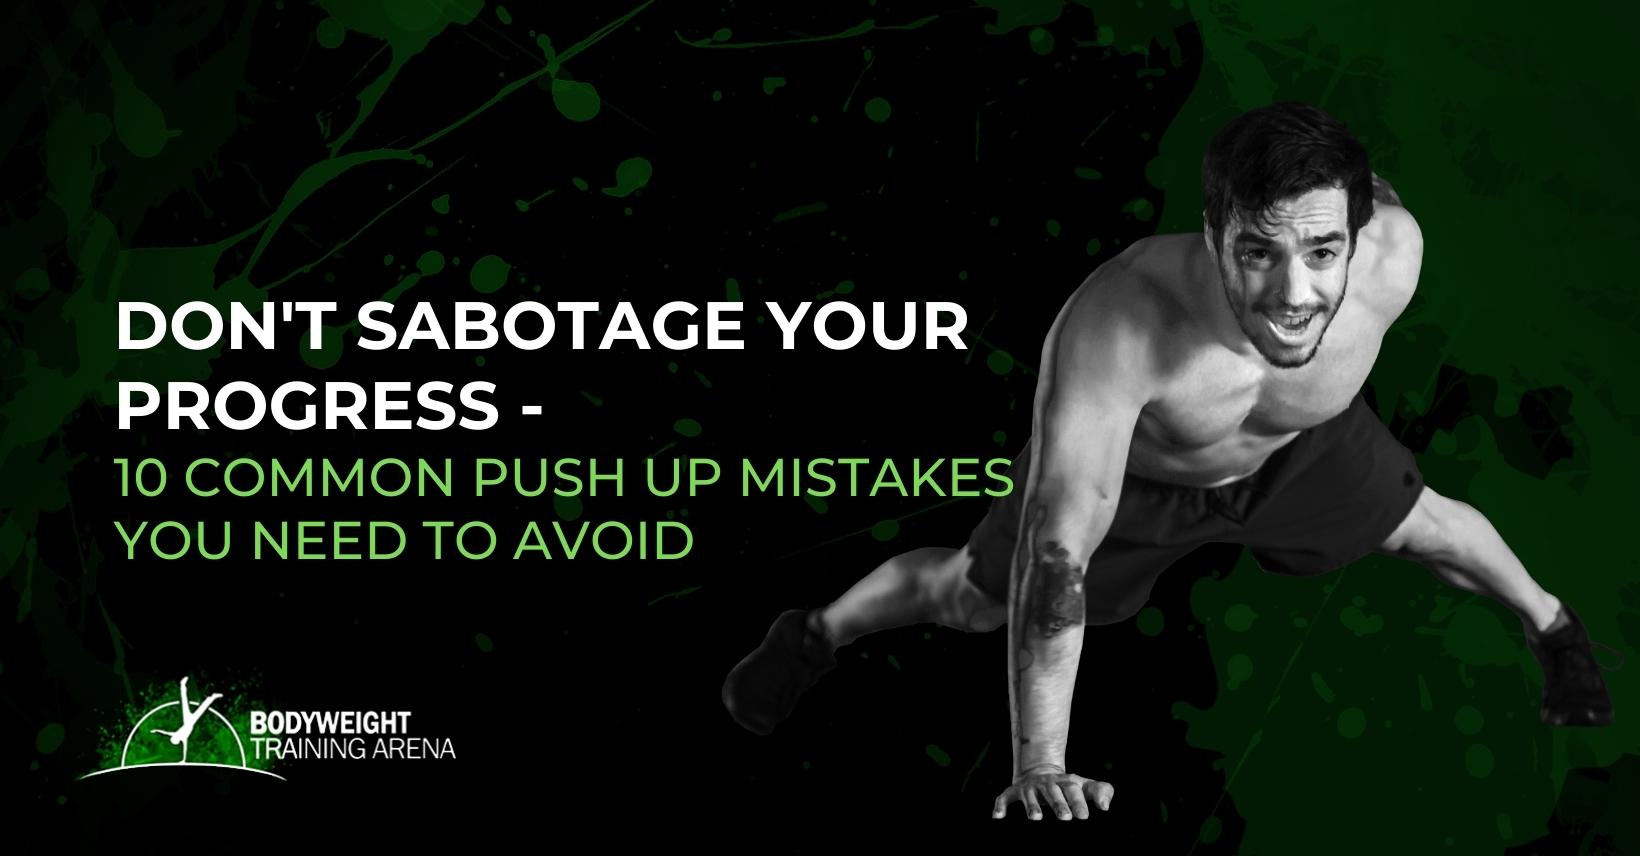 DON’T SABOTAGE YOUR PROGRESS – 10 common push up mistakes you need to avoid